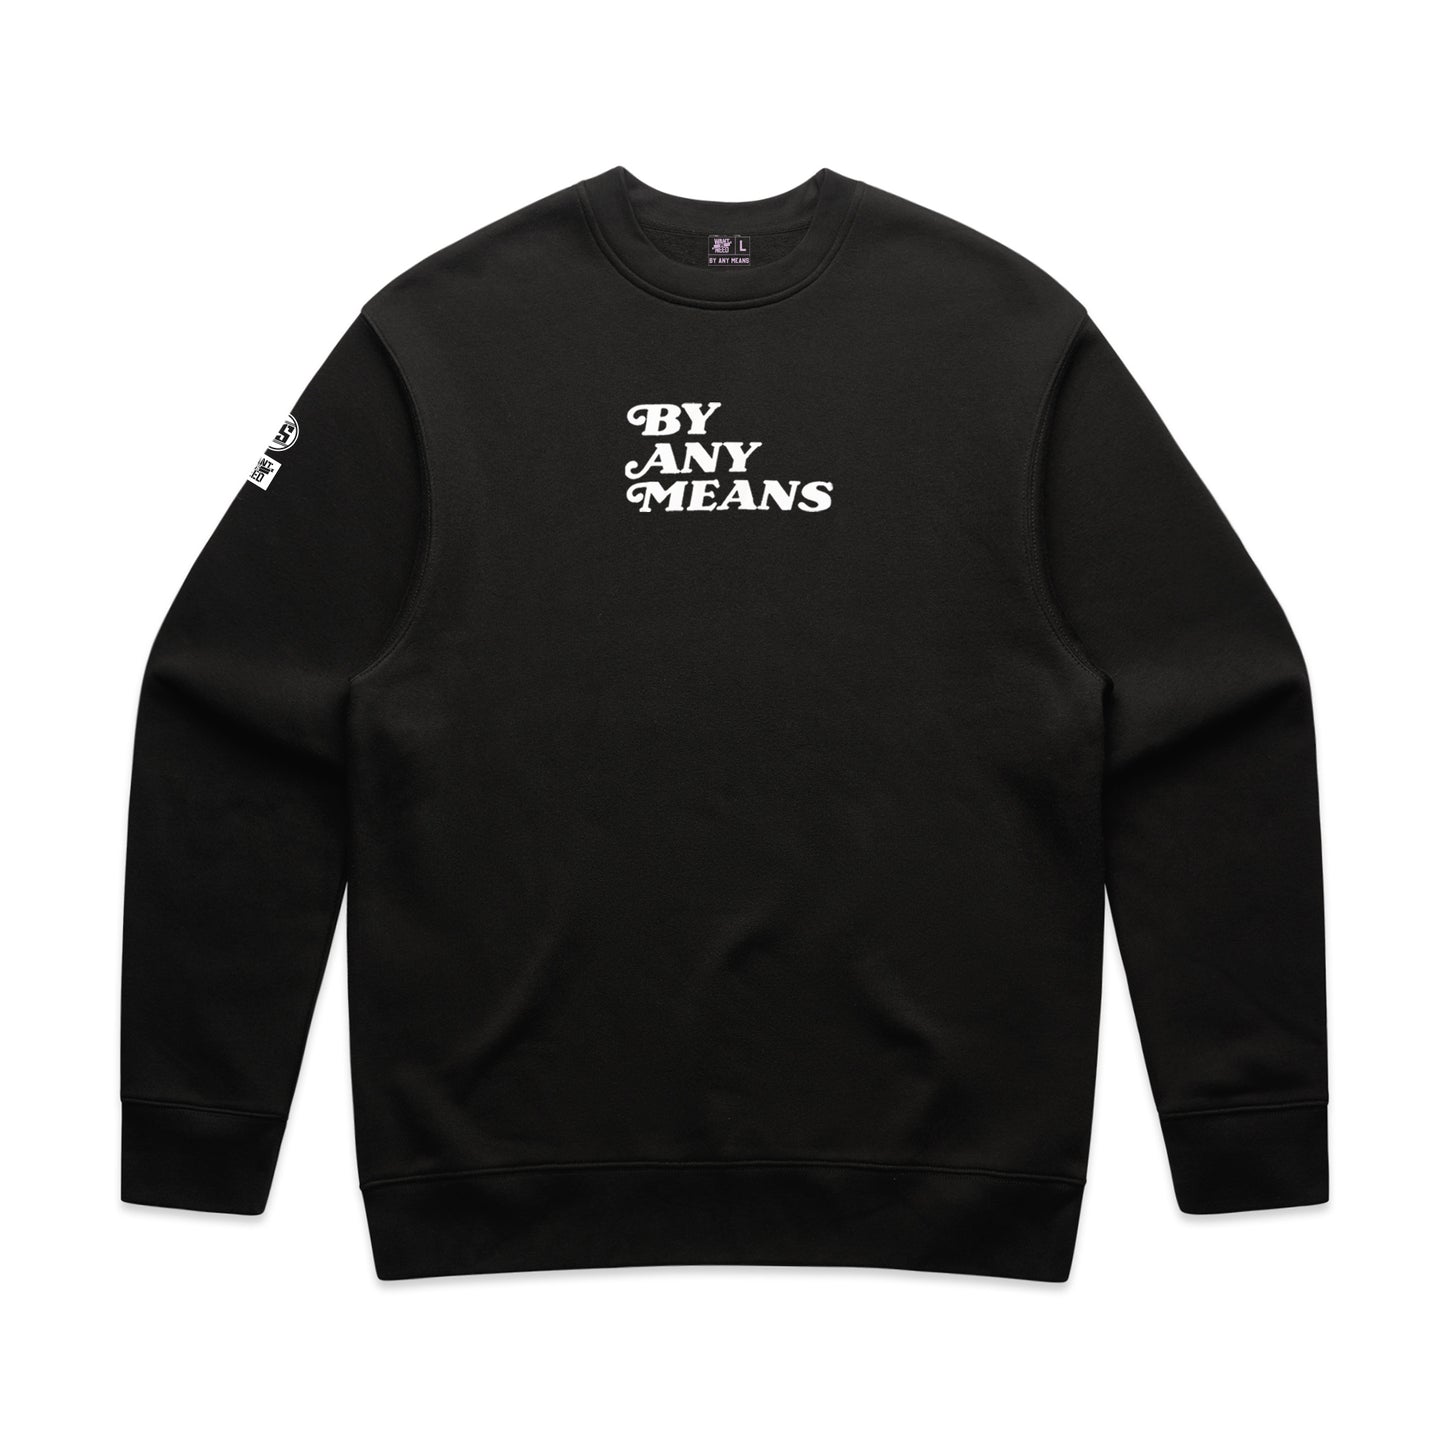 ADULT BY ANY MEANS PUFF PULLOVER CREWNECK - BLACK